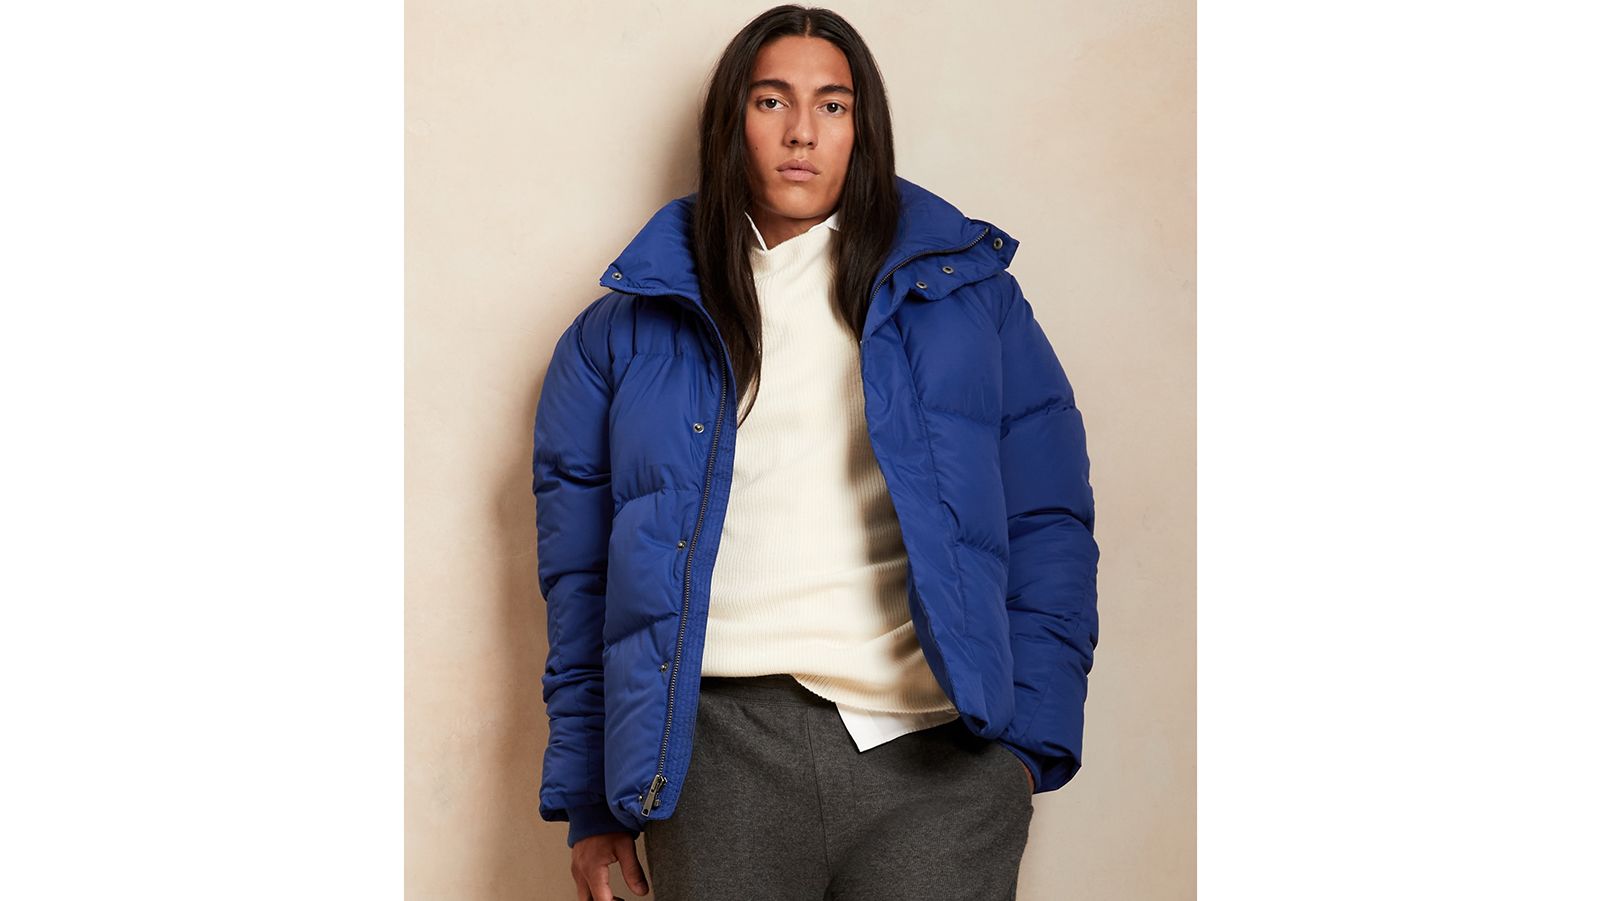 The Puffer Jackets – Trendy Jackets for Men and Women